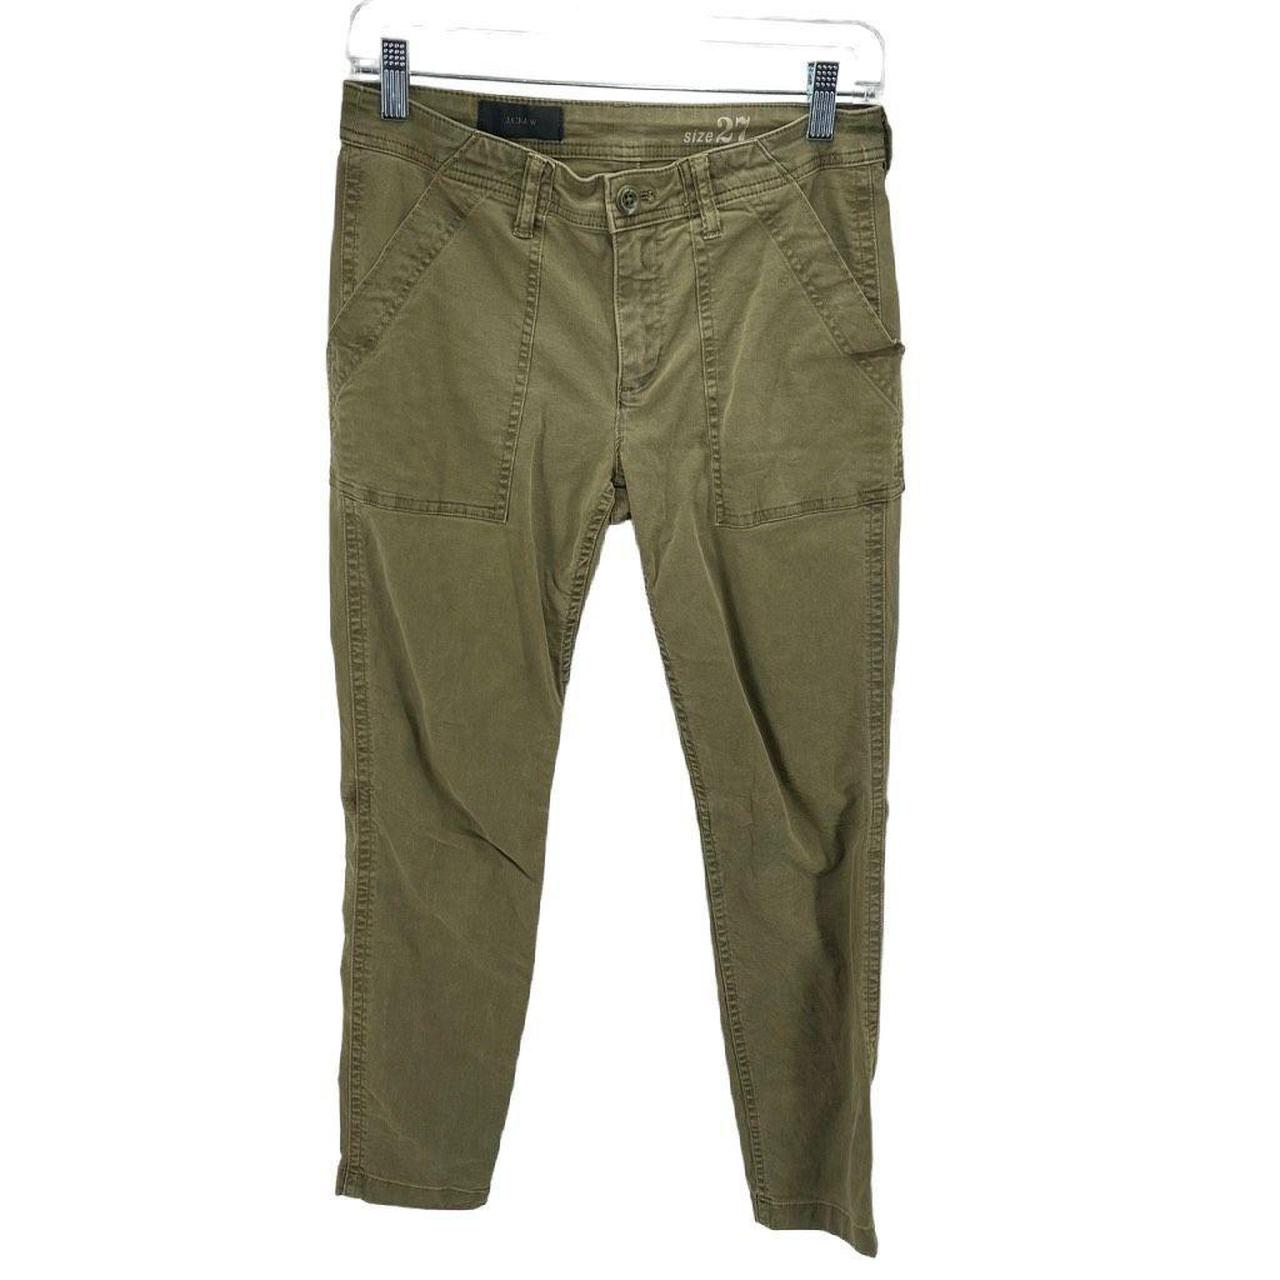 J. Crew Pants Womens 0 Olive Green Canteen City Fit Casual Cotton  Drawstring